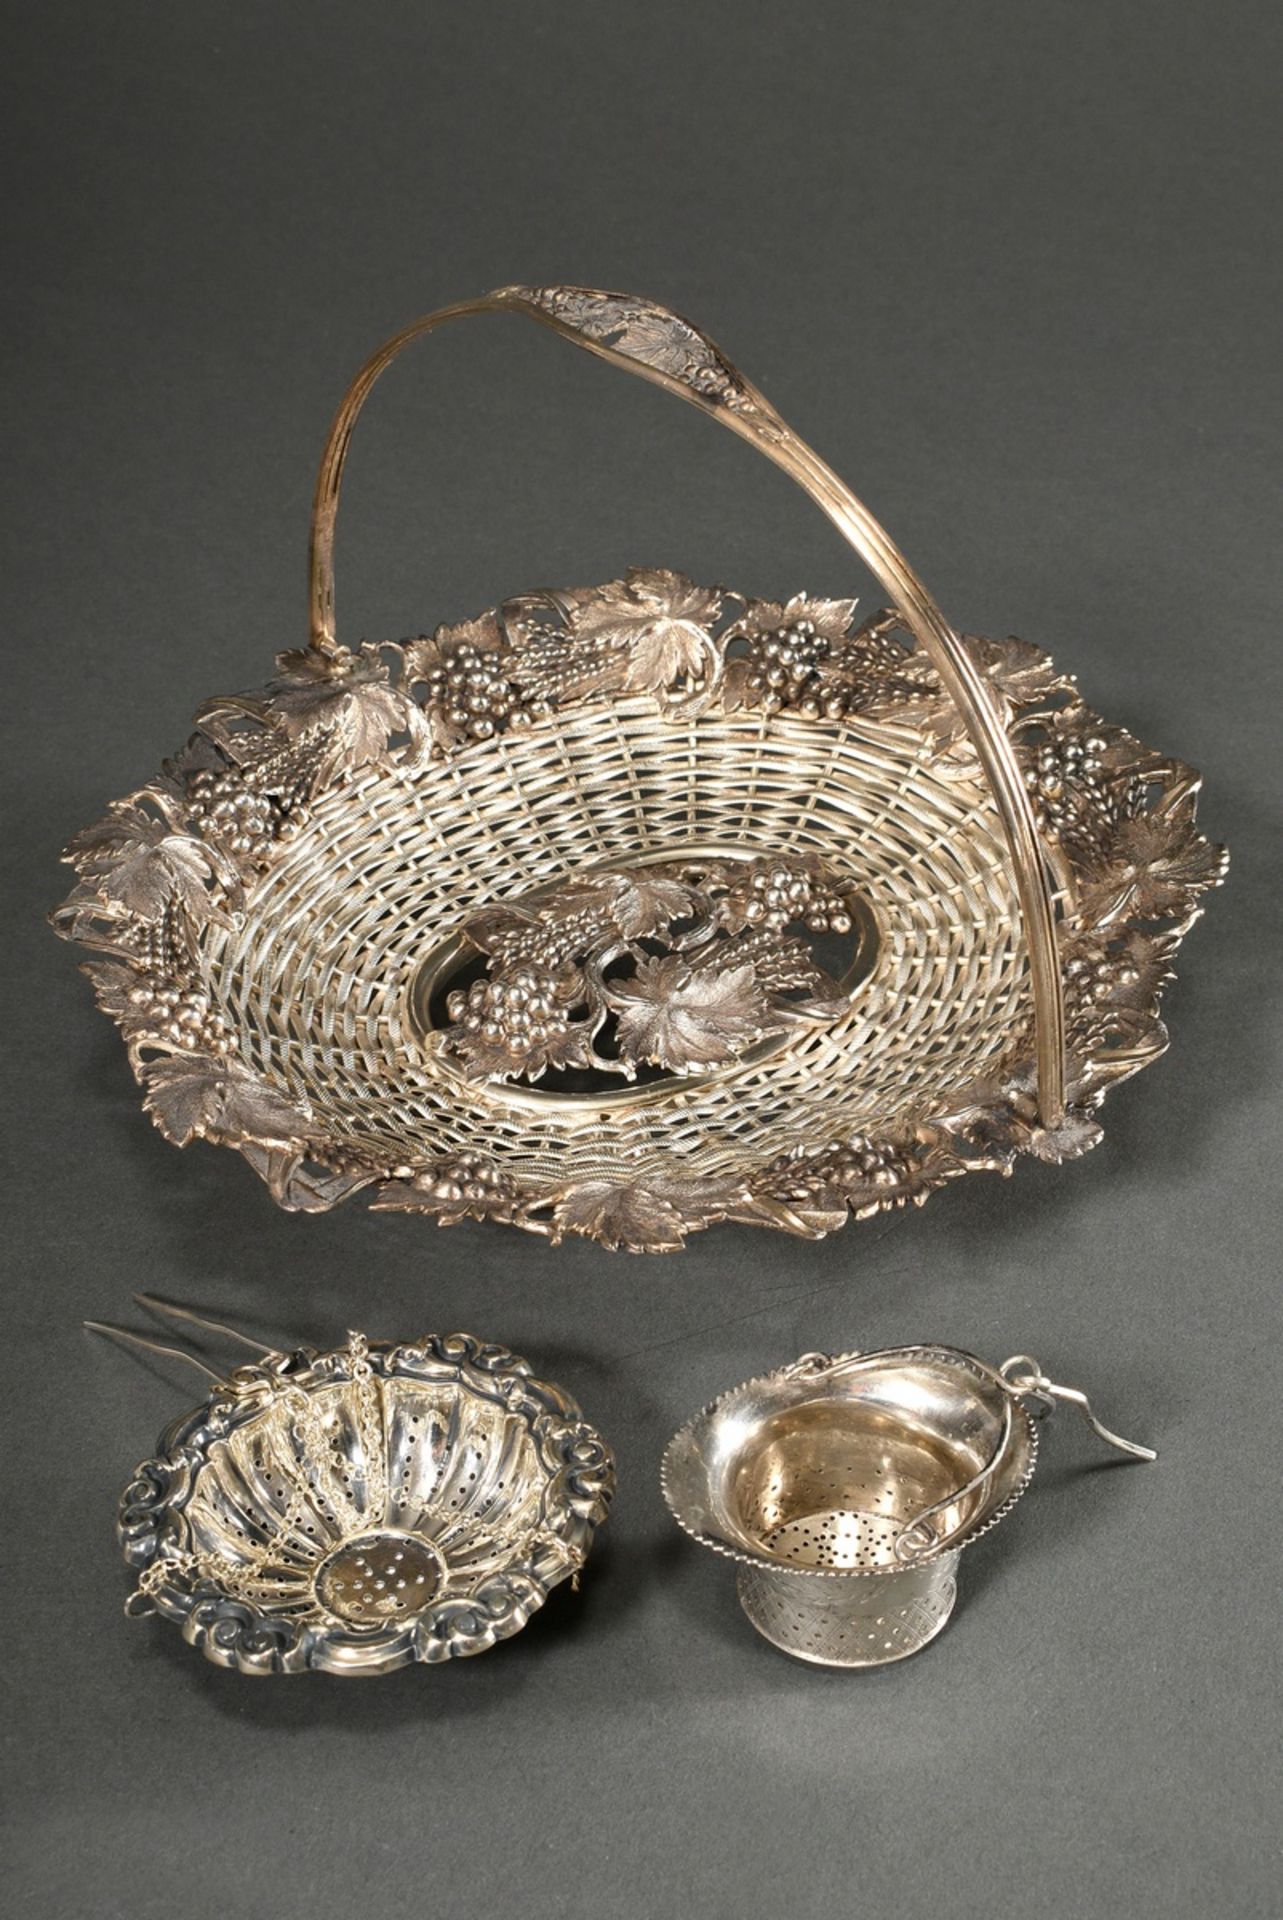 3 Various pieces of silver-plated Biedermeier pastry basket (21x19.5cm) and 2 tea strainers for han